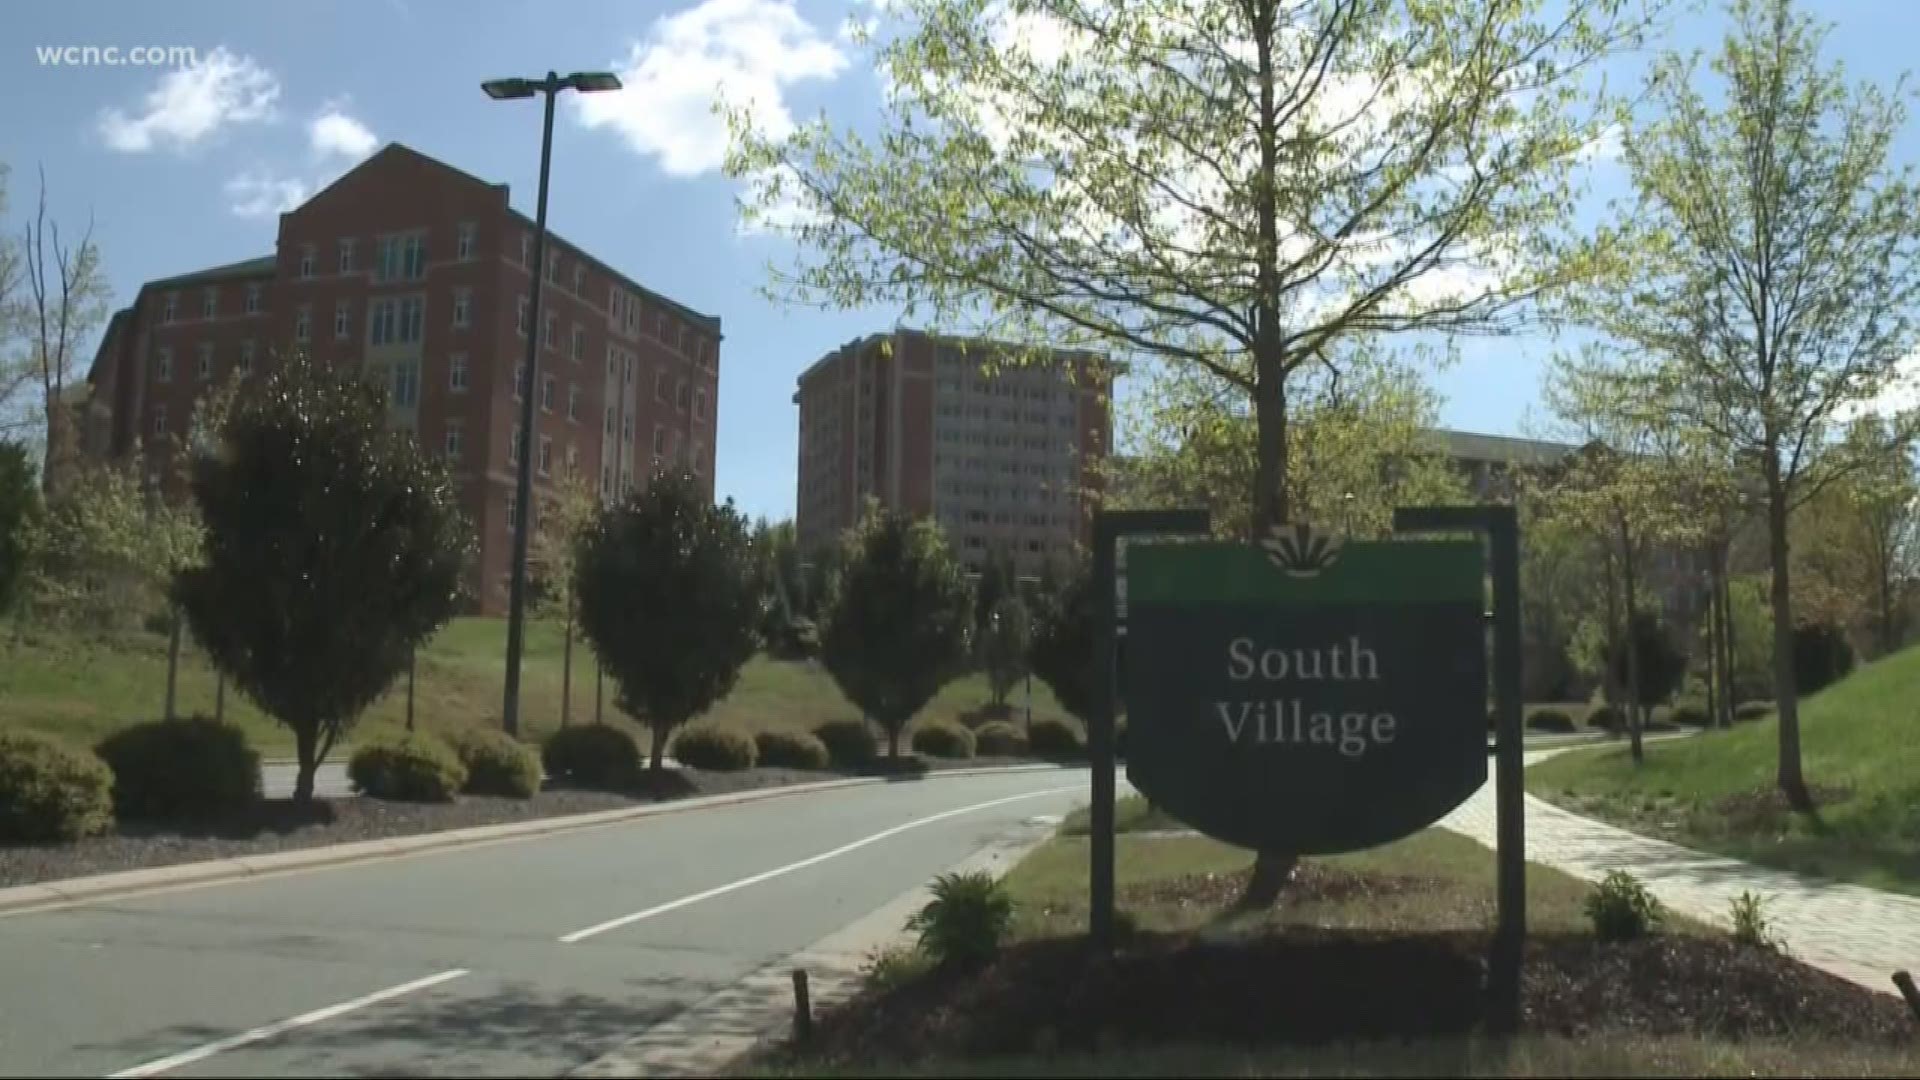 UNC Charlotte Chancellor Philip Dubois announced Thursday that it may become necessary for multiple residence halls on campus be used to help COVID-19 response.